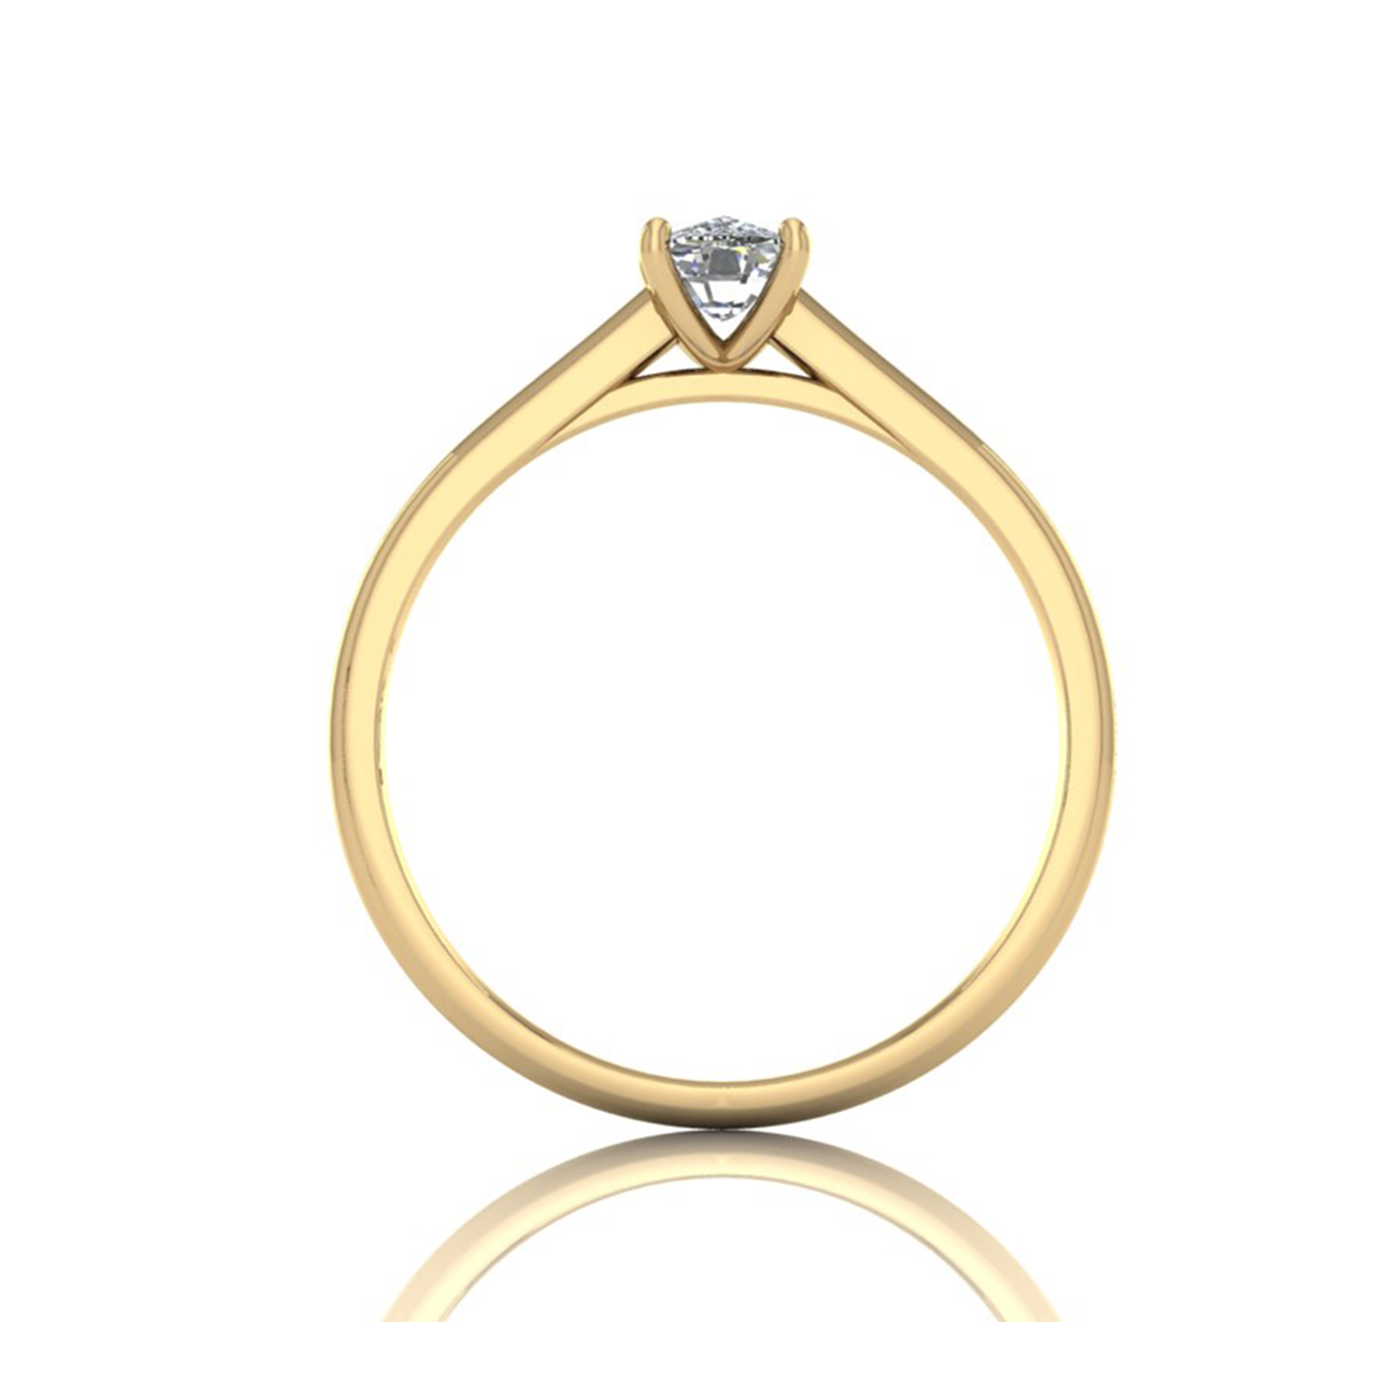 18k yellow gold  0,80 ct 4 prongs solitaire elongated cushion cut diamond engagement ring with whisper thin band